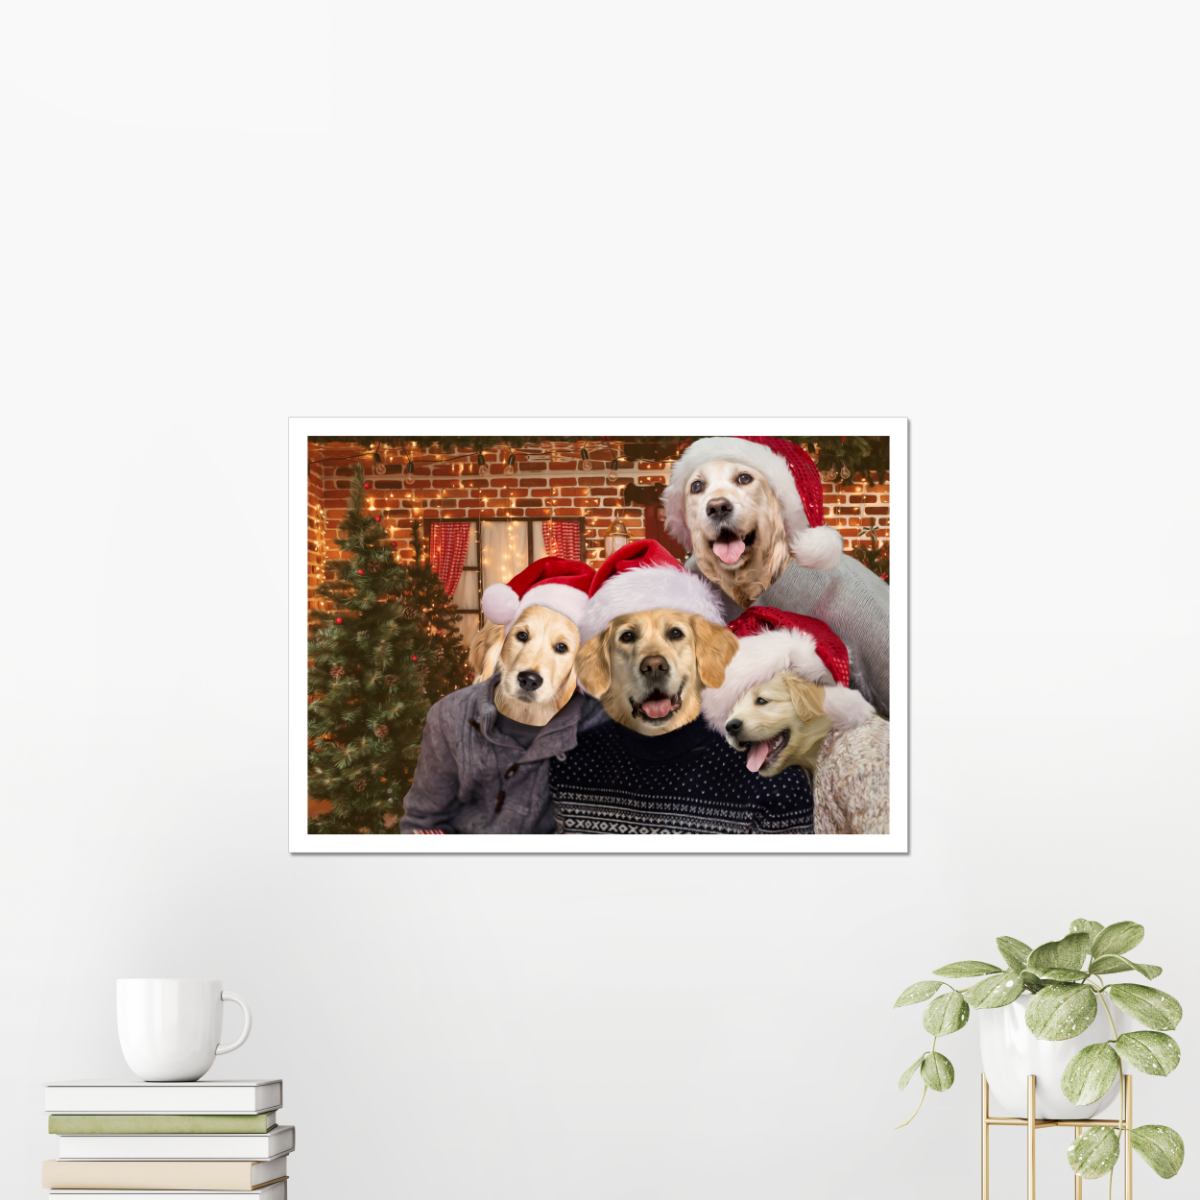 The Christmas Family: Custom Pet Poster - Paw & Glory - #pet portraits# - #dog portraits# - #pet portraits uk#Paw & Glory, paw and glory, noble pets pet renaissance portrait, framed pet portraits pet face canvas renaissance painting of dog turn dog into portrait pet portraits